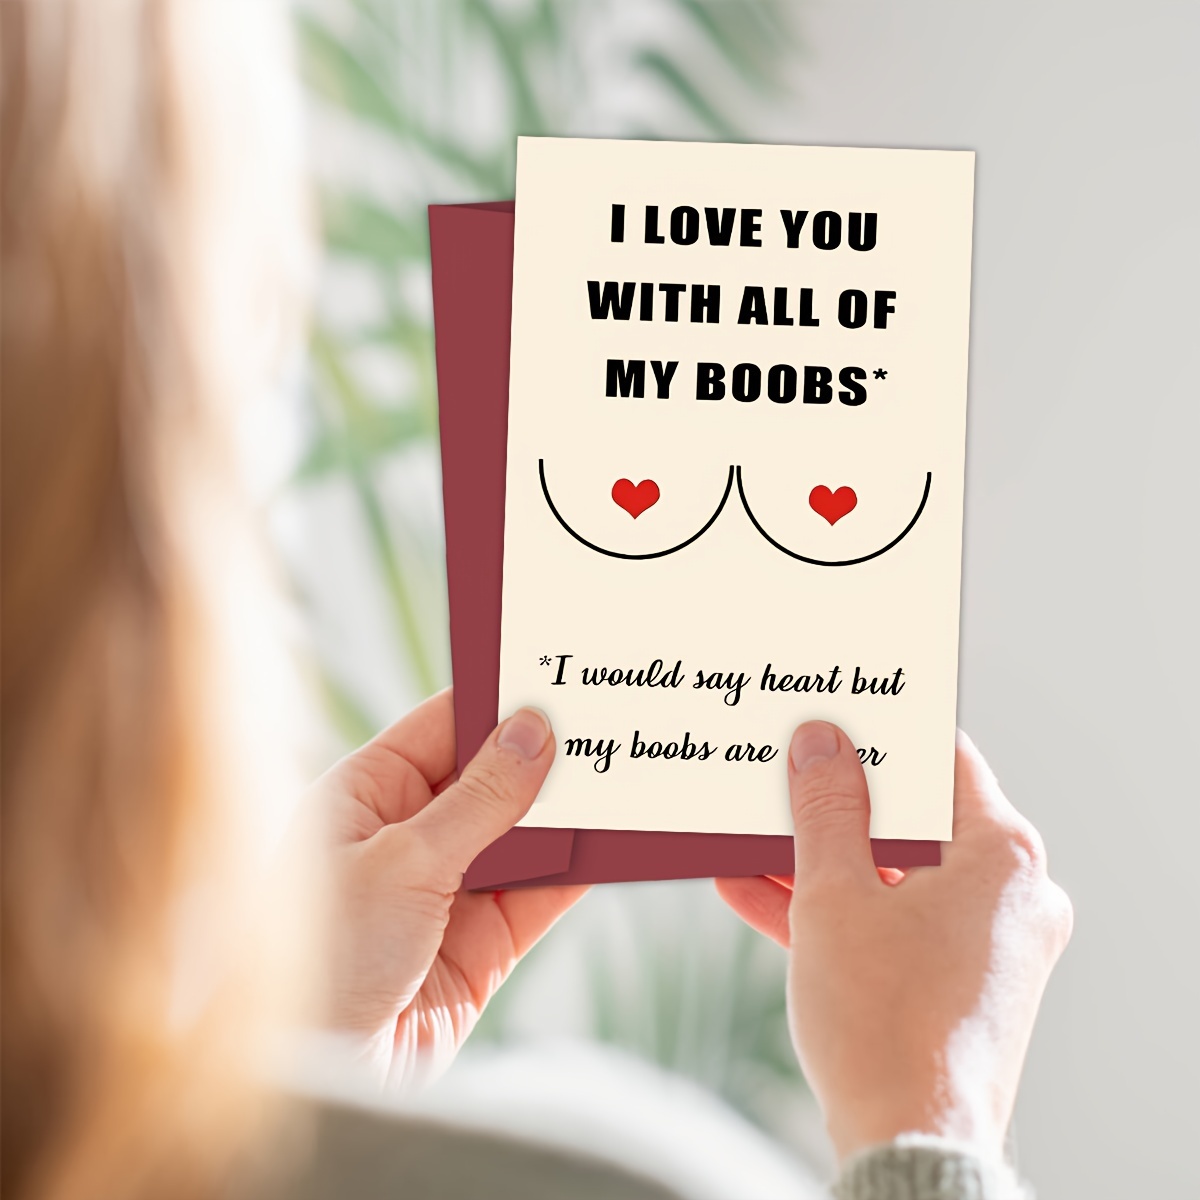 I love you with all off my boobs I would sey heart but my boobs